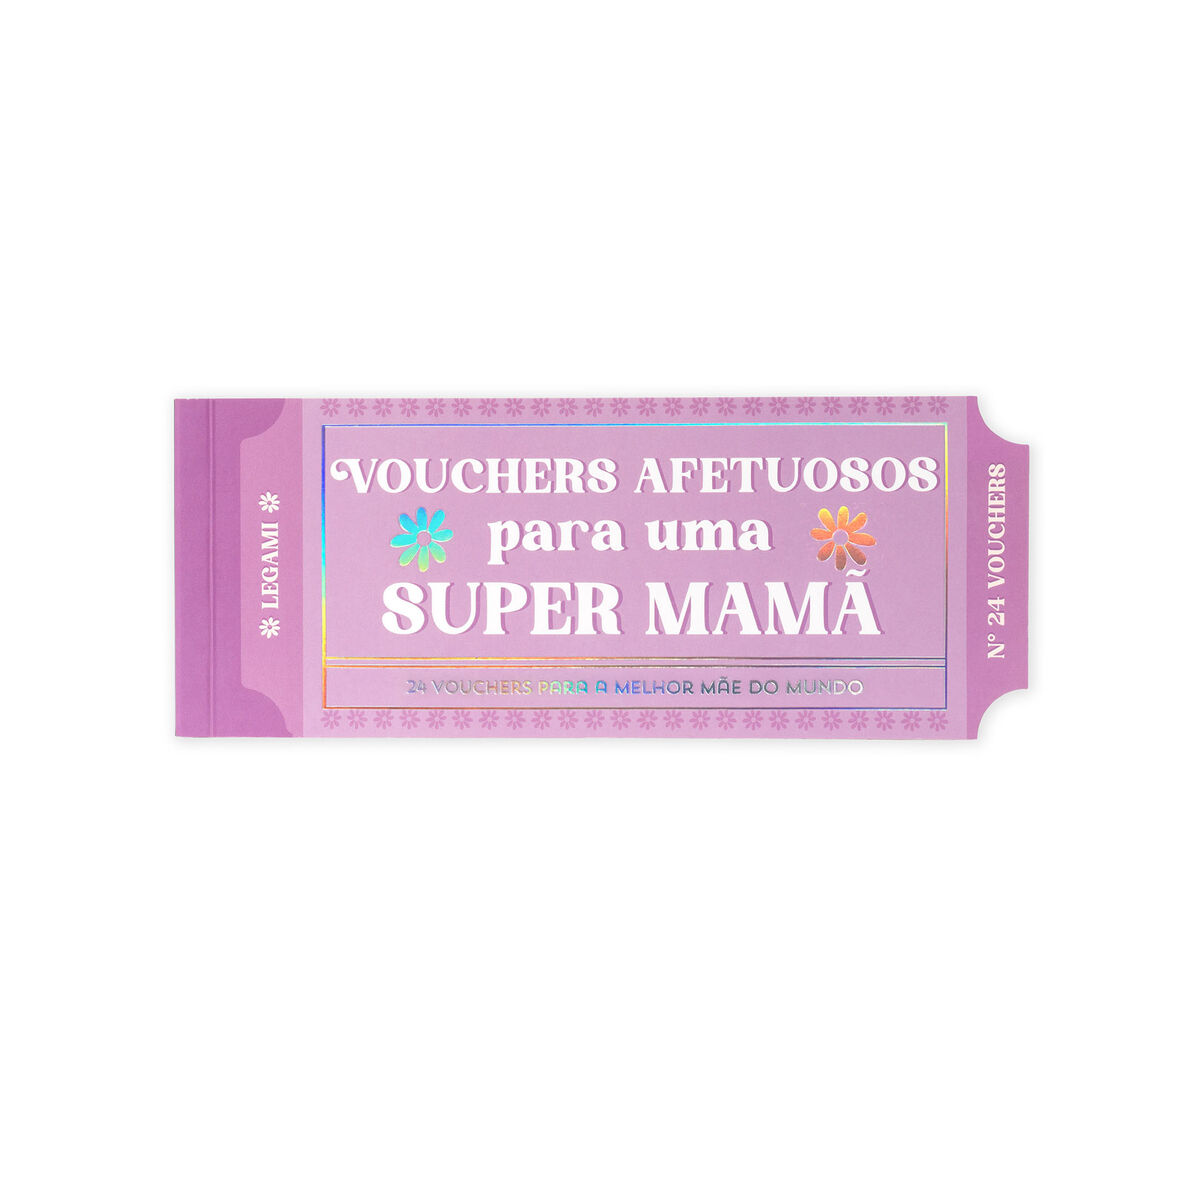 Book of 24 Vouchers for Mums - Portuguese, , zoo